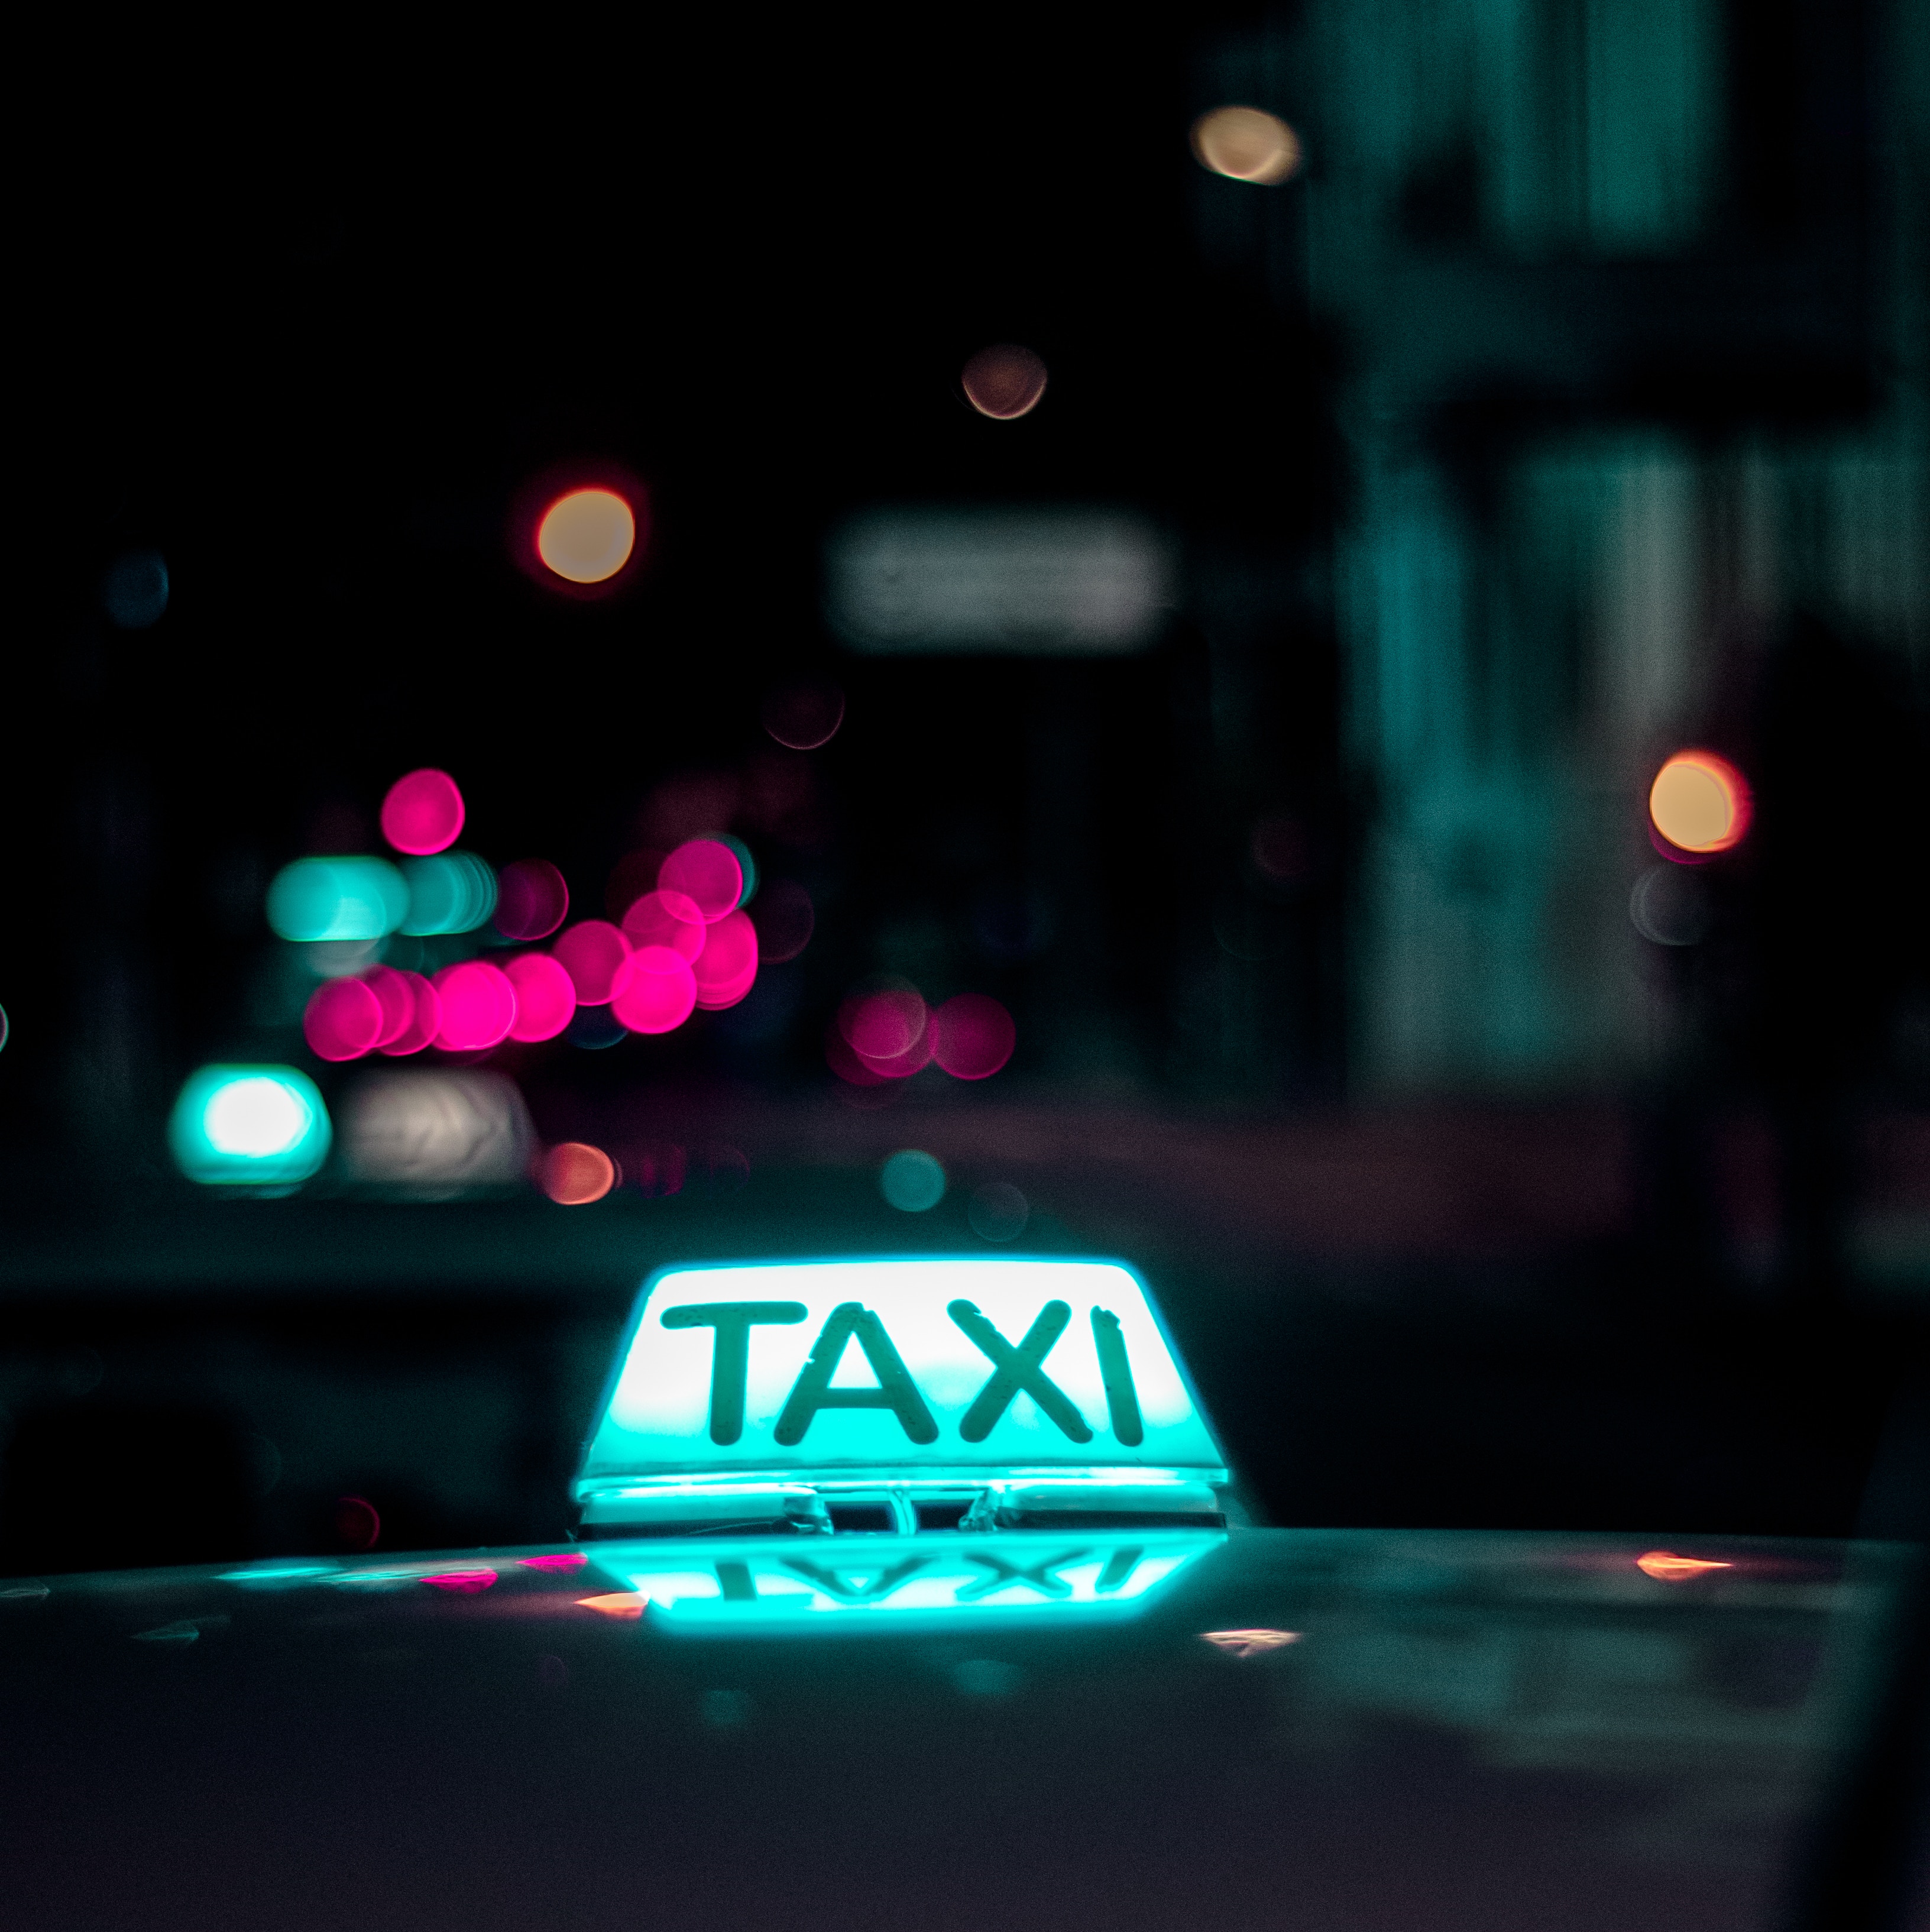 8k Taxi Images